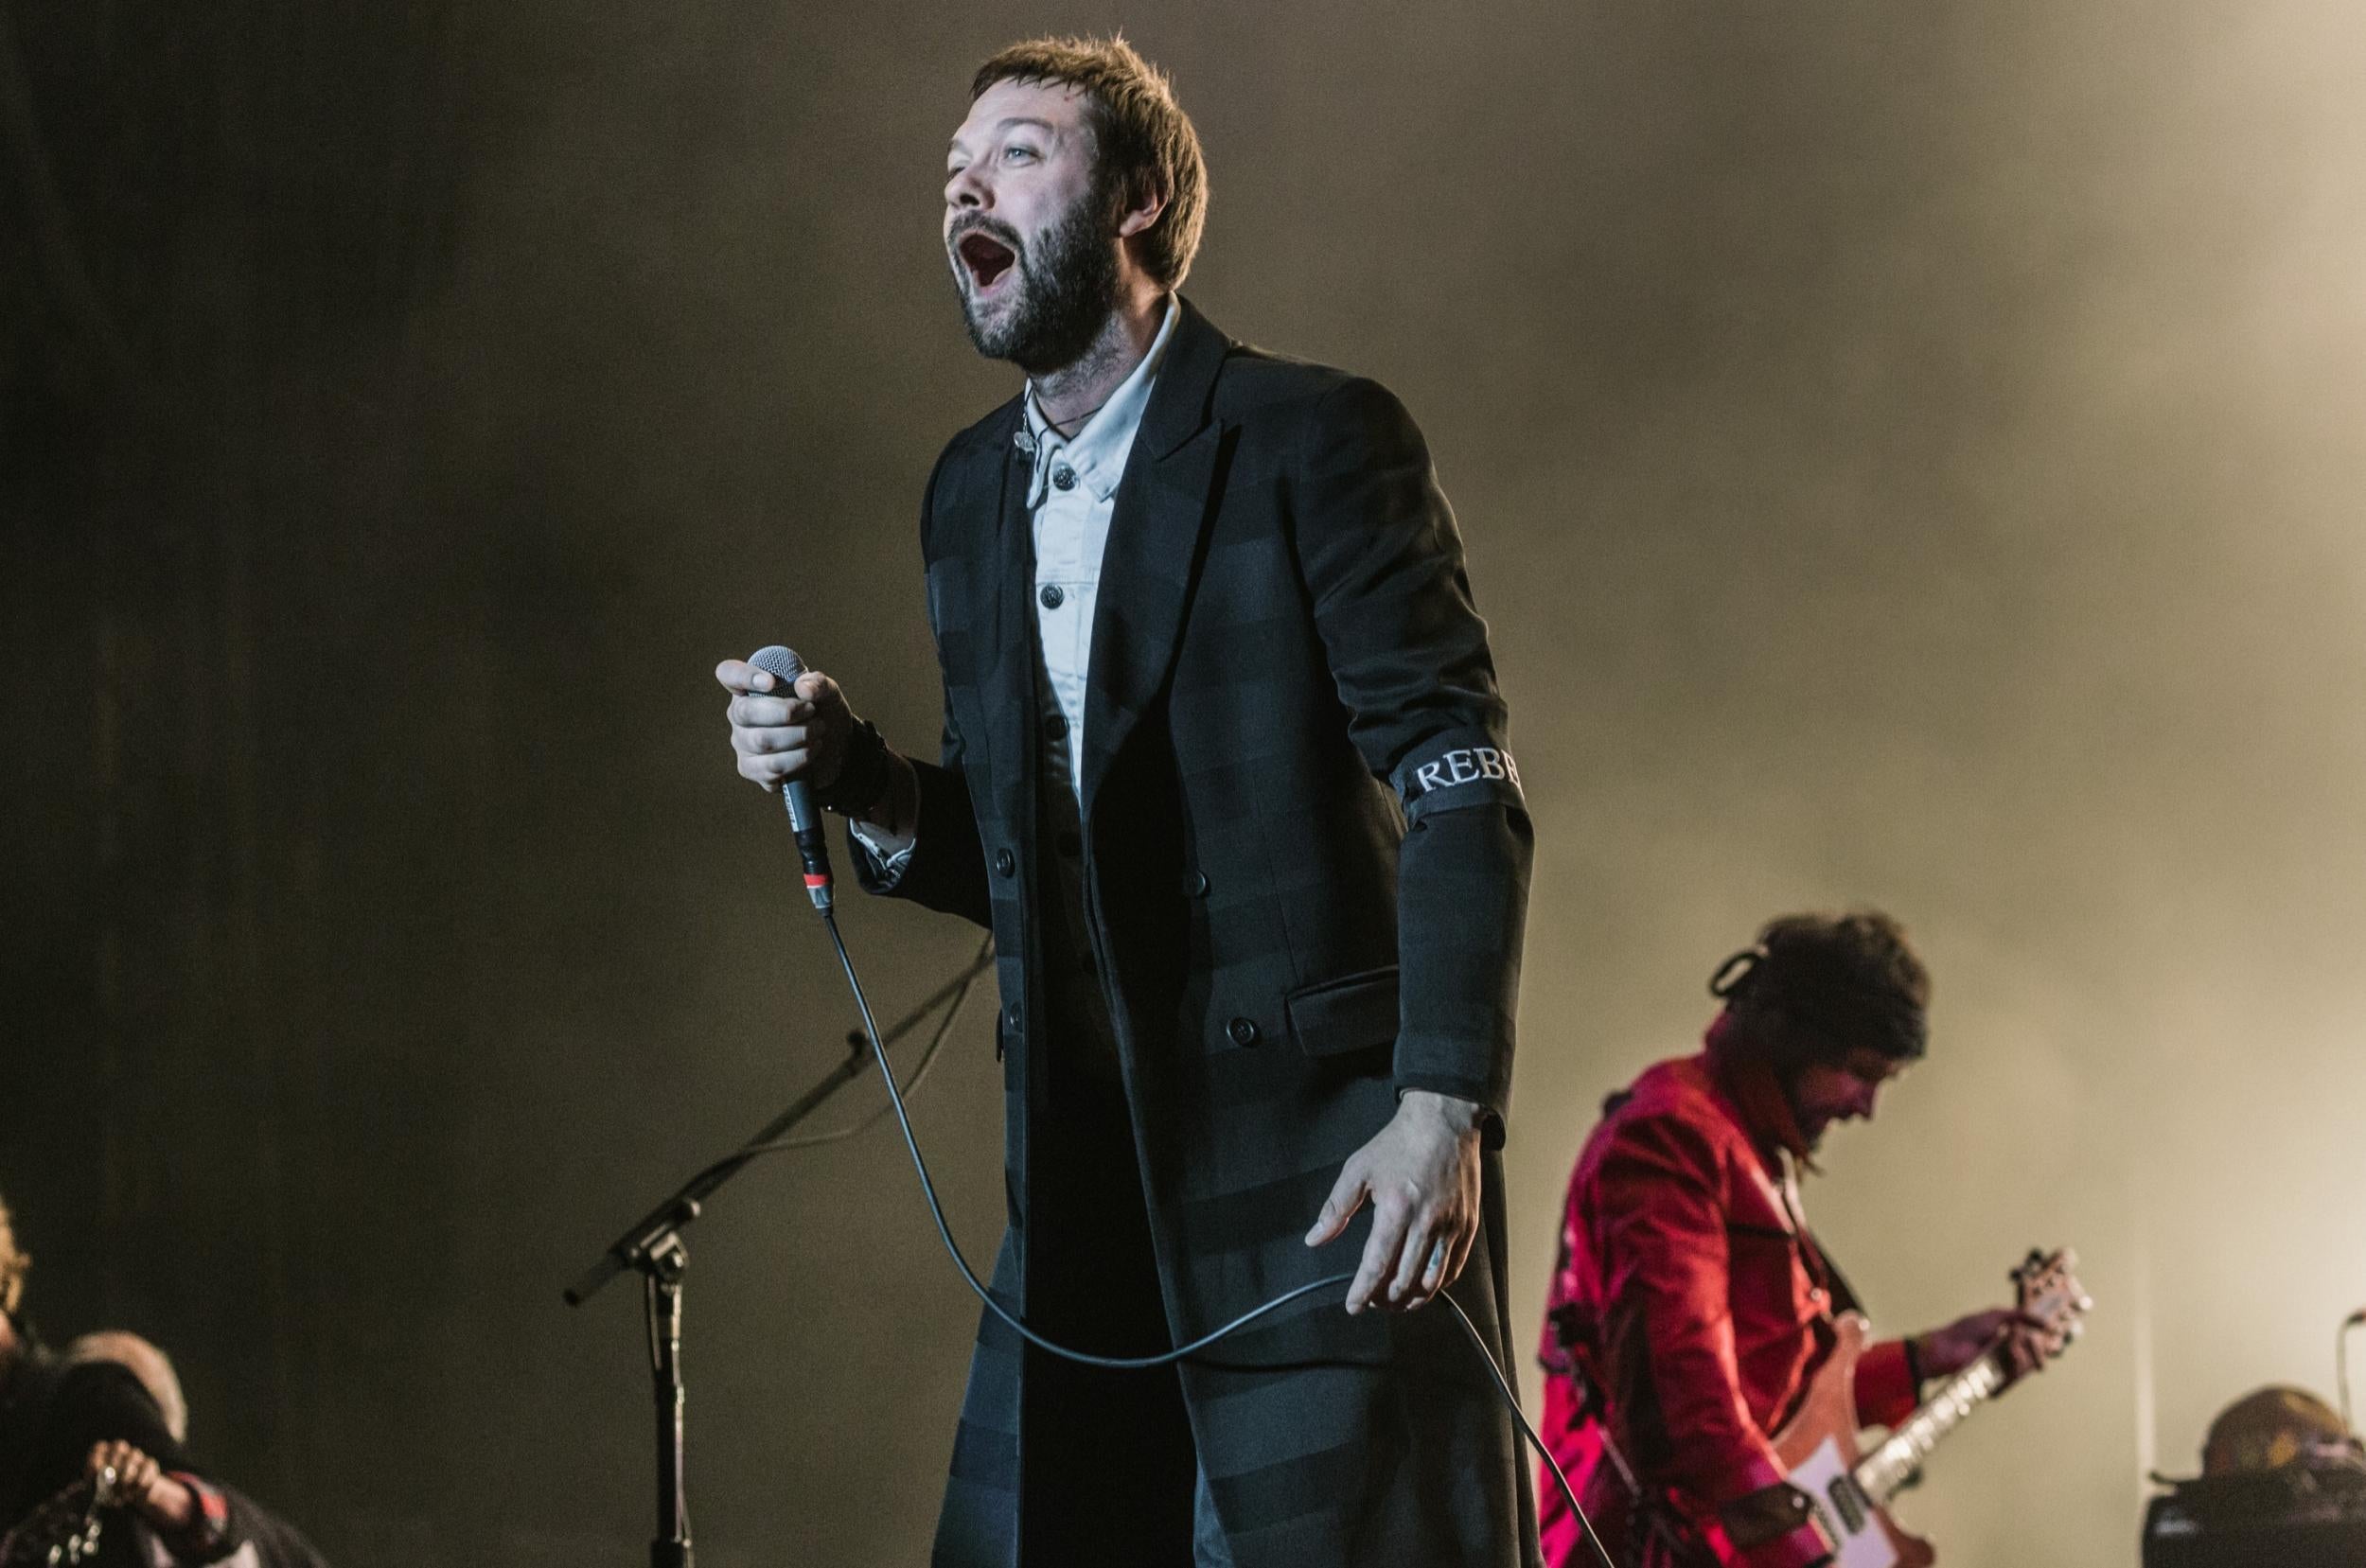 Kasabian's performance was muted as Tom Meighan was ill